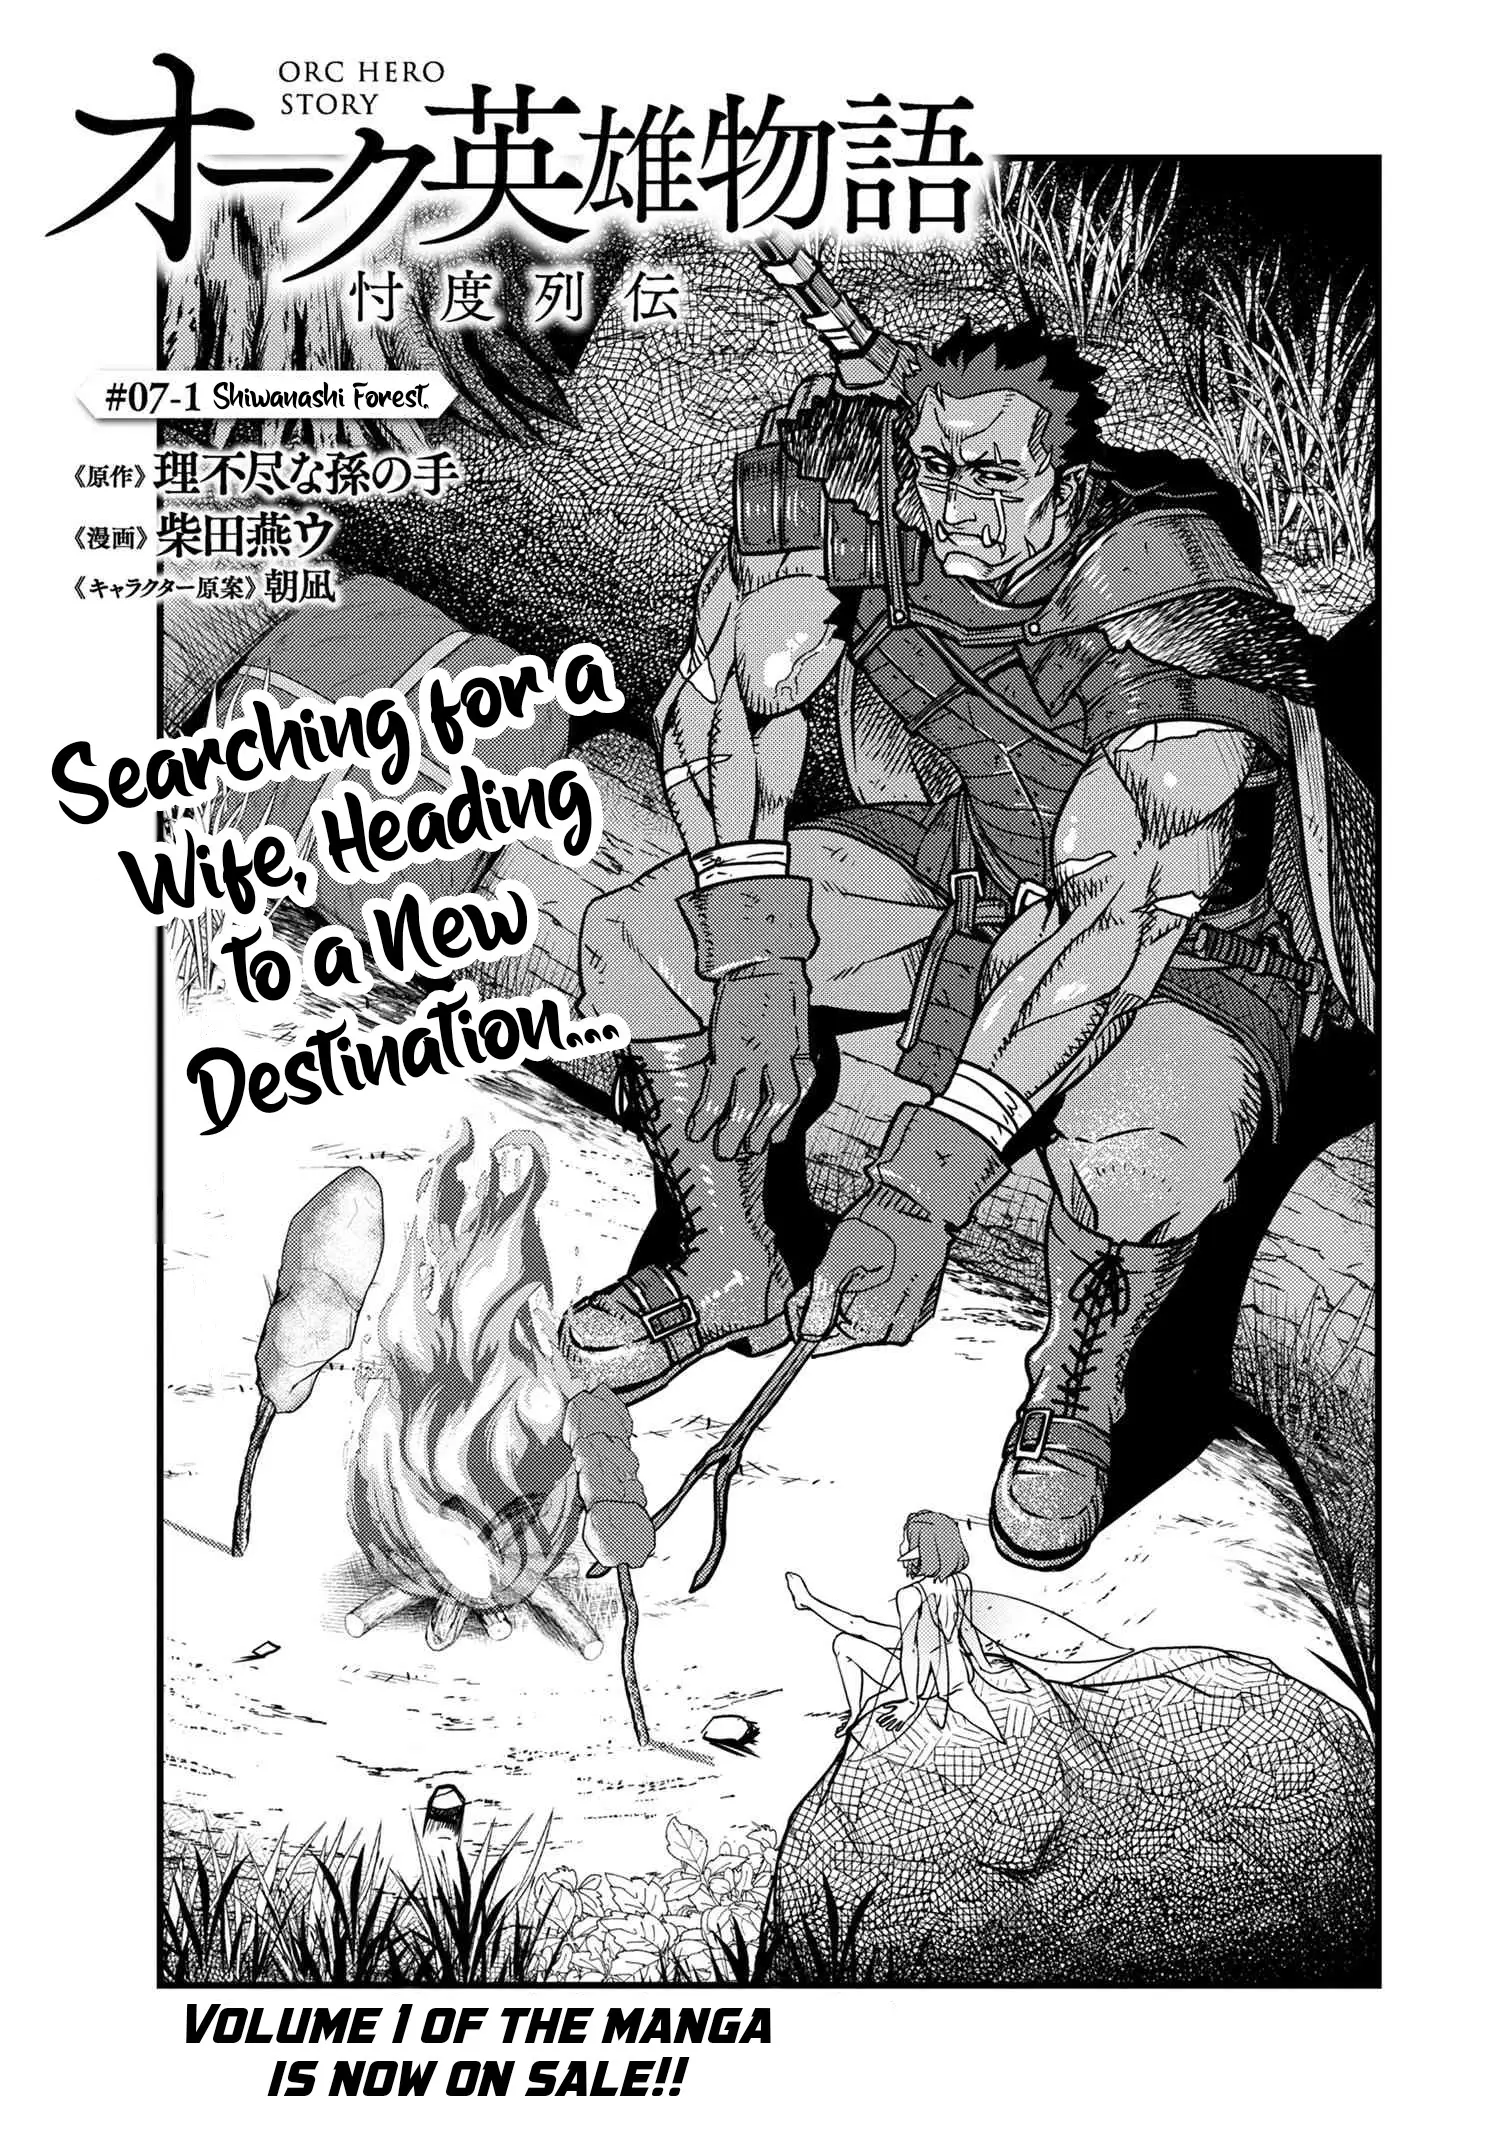 Orc Hero Story - Discovery Chronicles - 7.1 page 3-384914c6